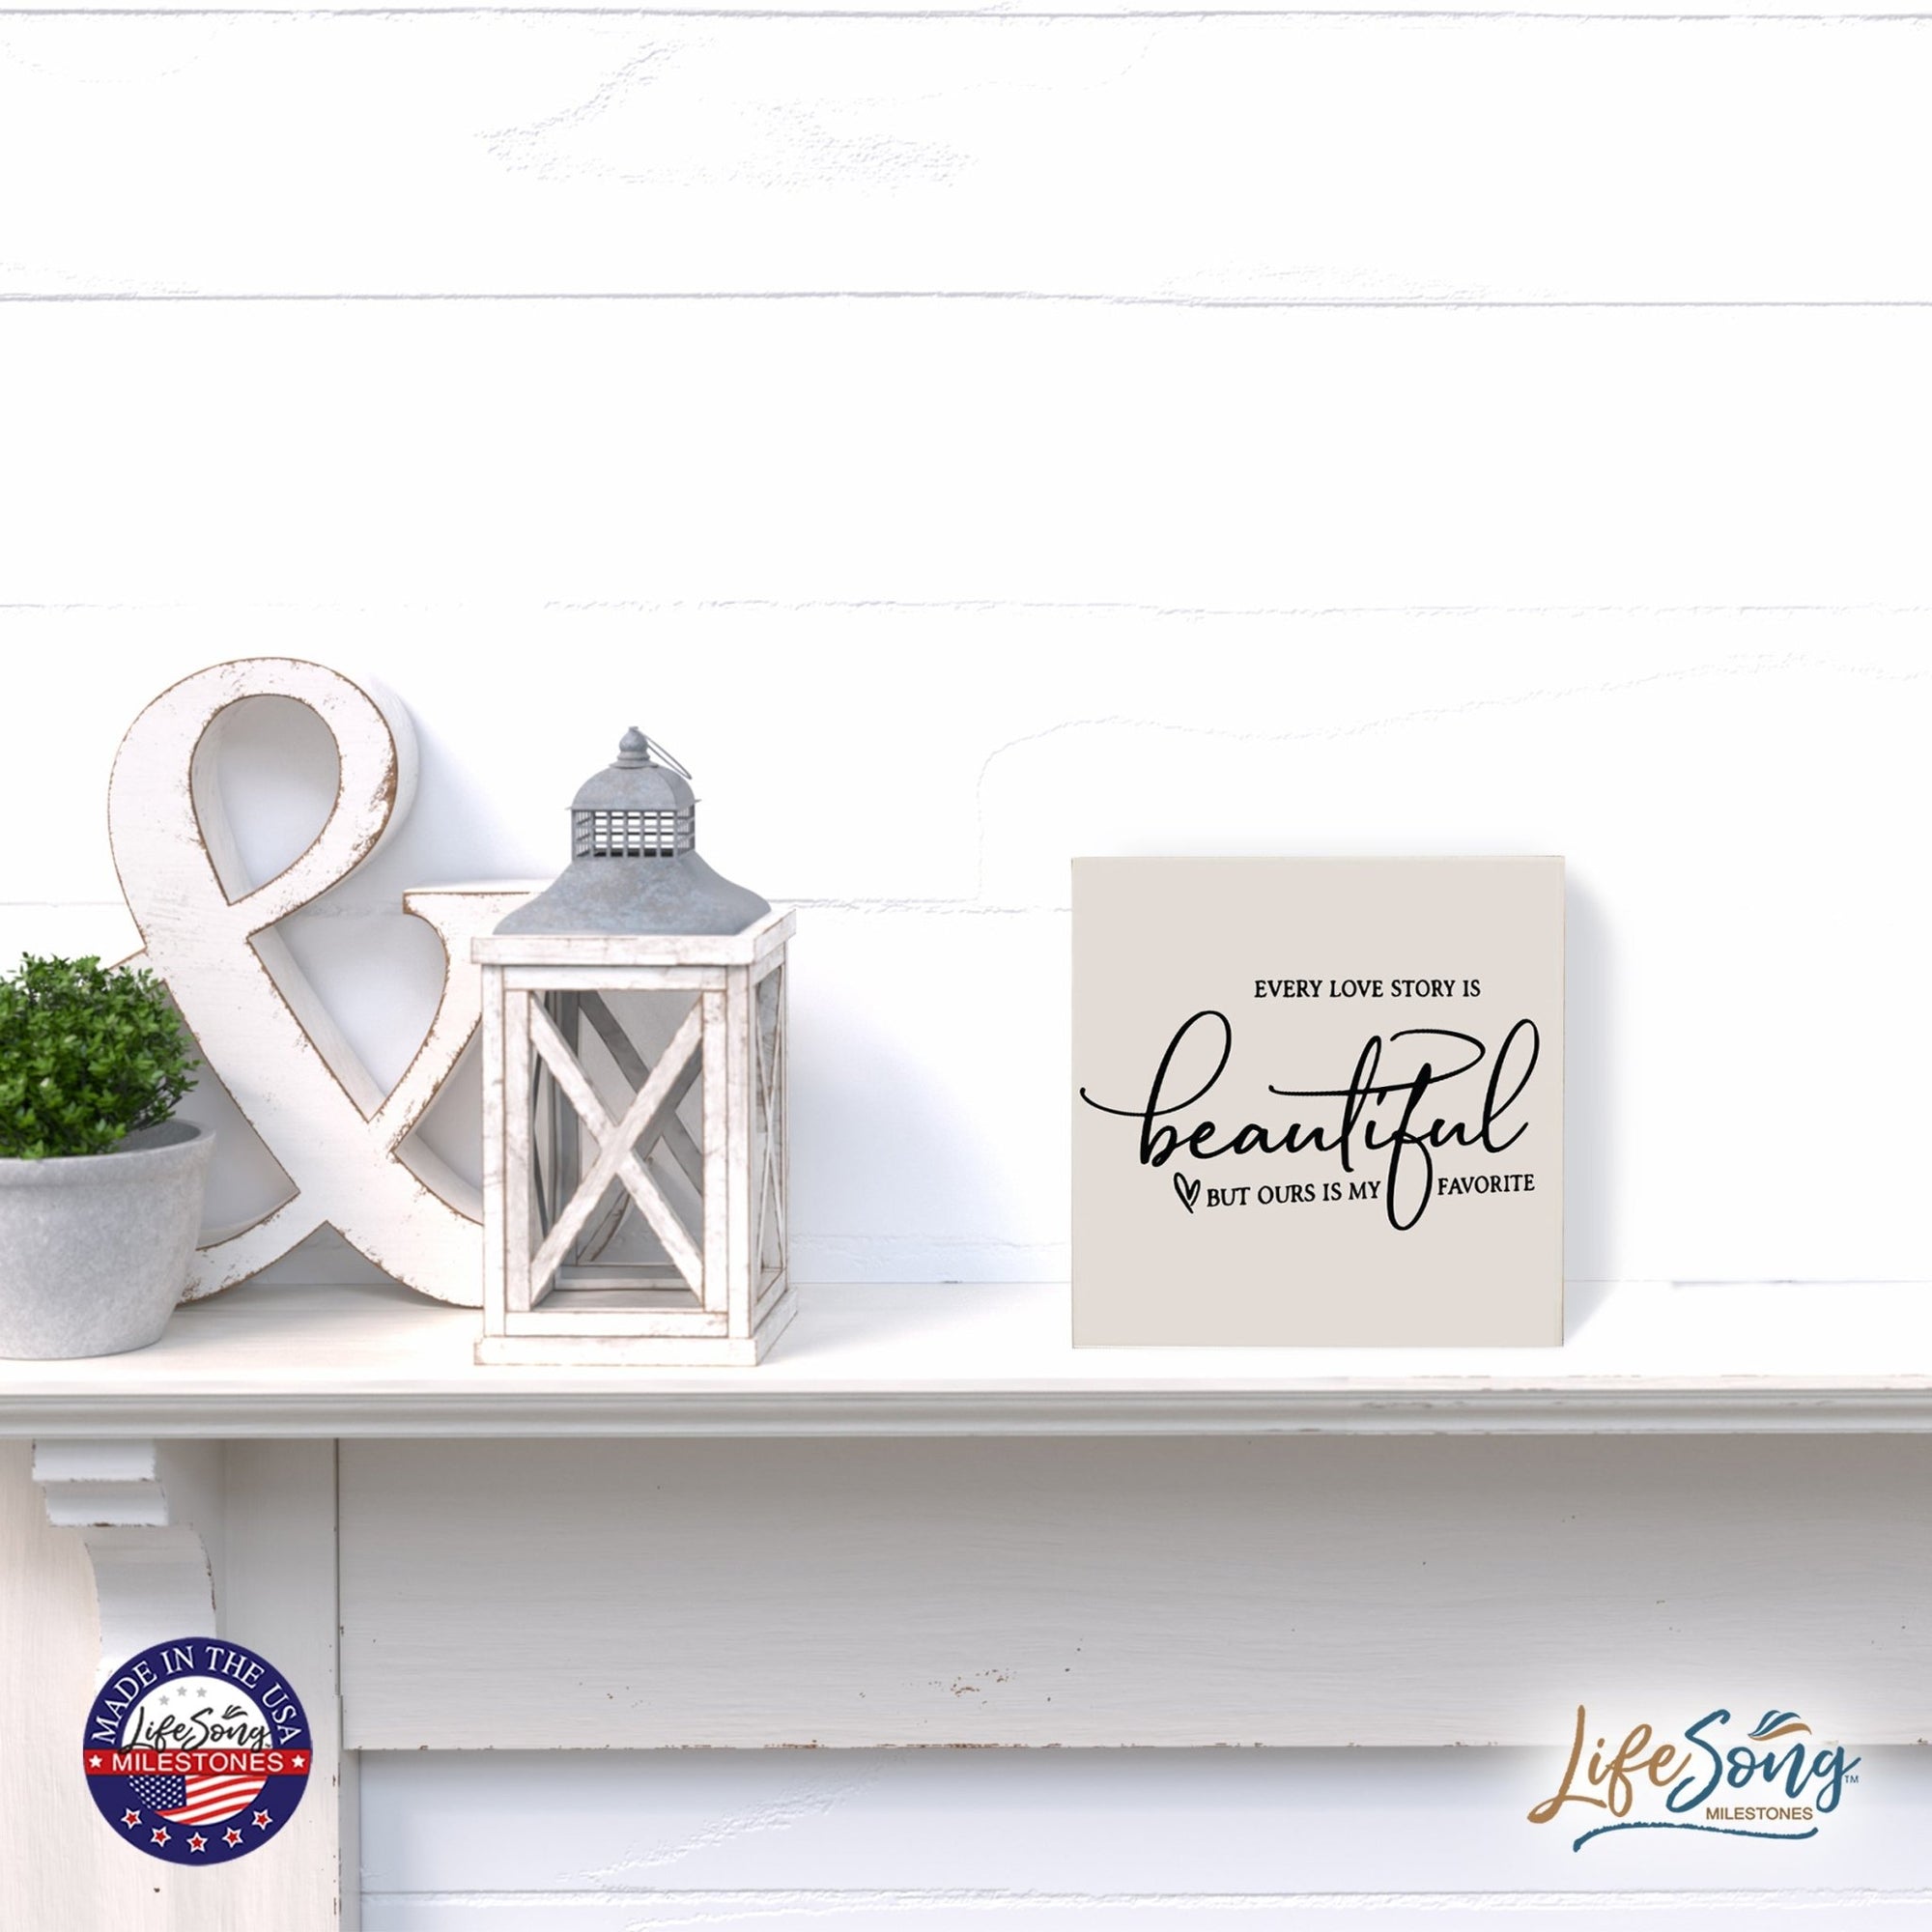 Everyday Shelf Décor - Our Love Story Is Beautiful - LifeSong Milestones